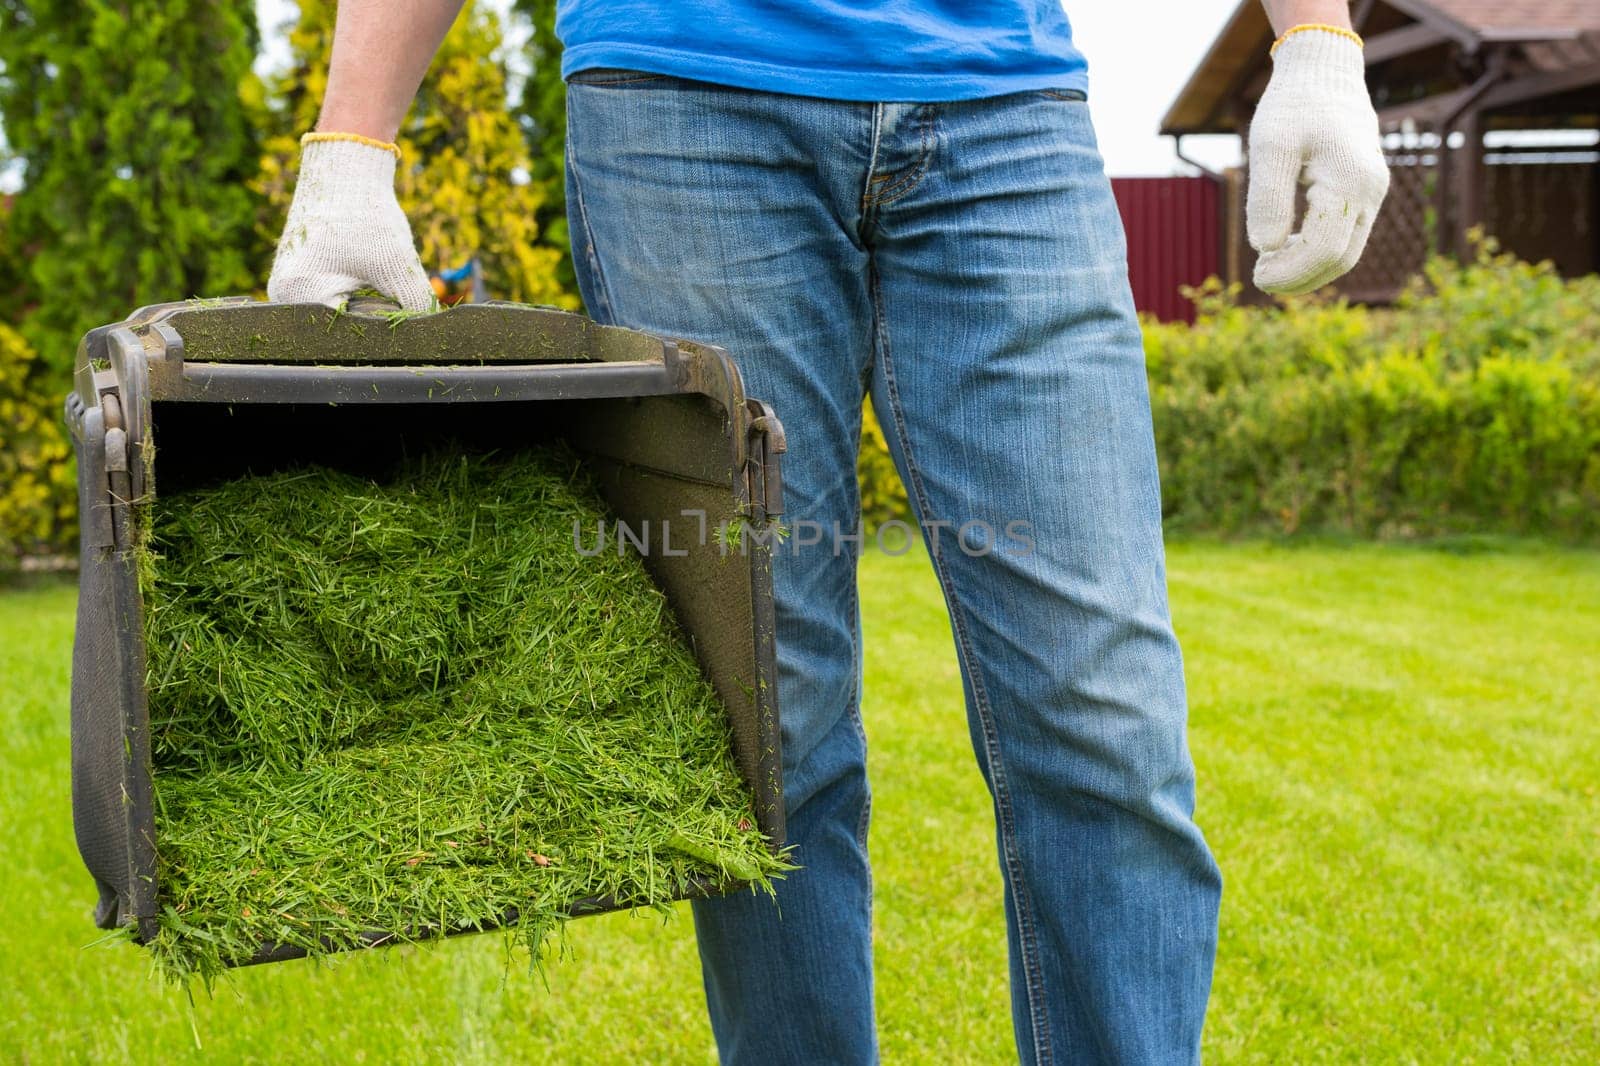 A container of mowed grass and a worker close-up. Housework.